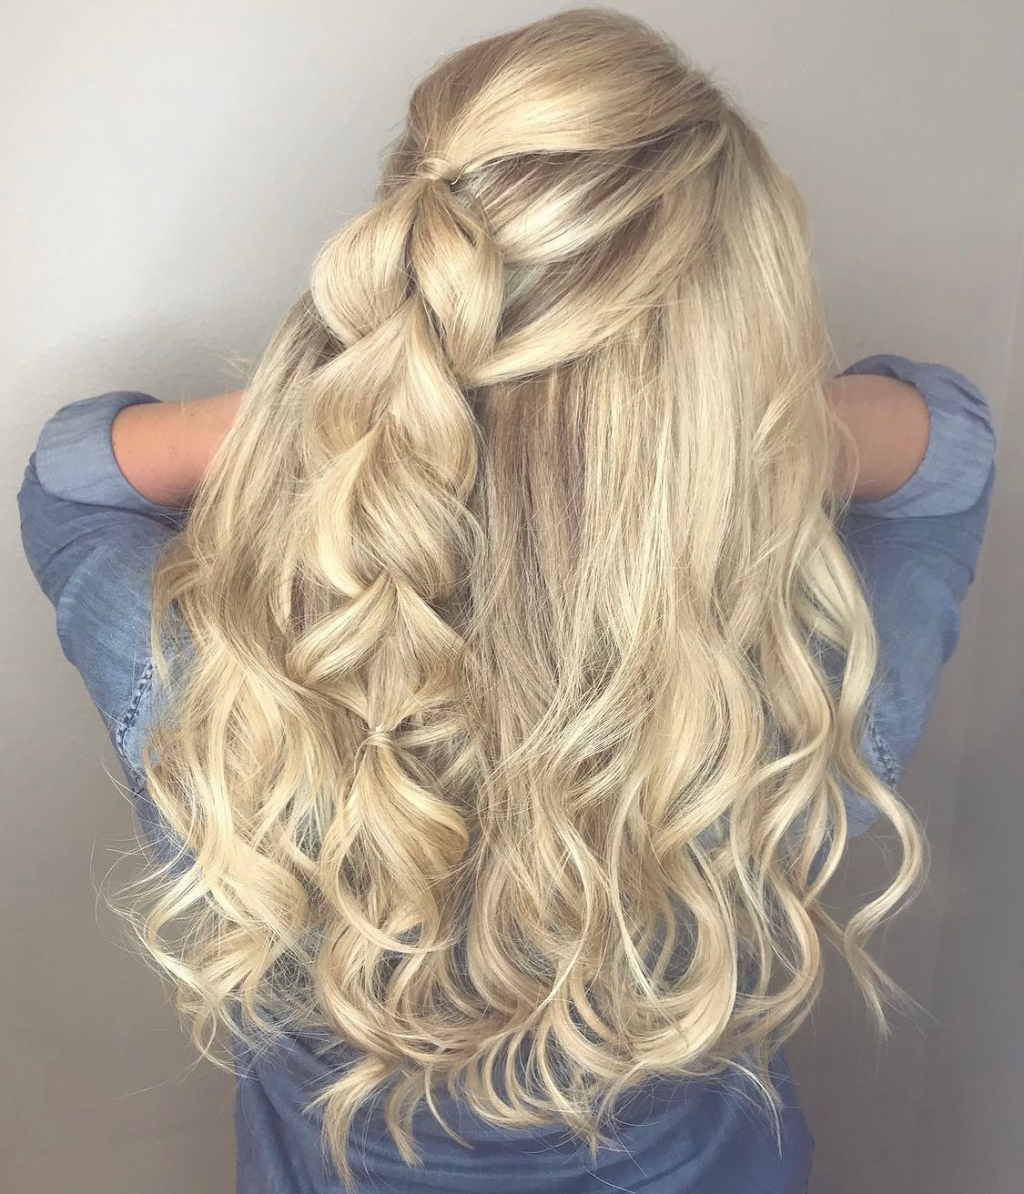 BlondeCat Boutique Salon | 2112 E State Hwy 114 Suite 203, Southlake, TX 76092, USA | Phone: (503) 314-6419